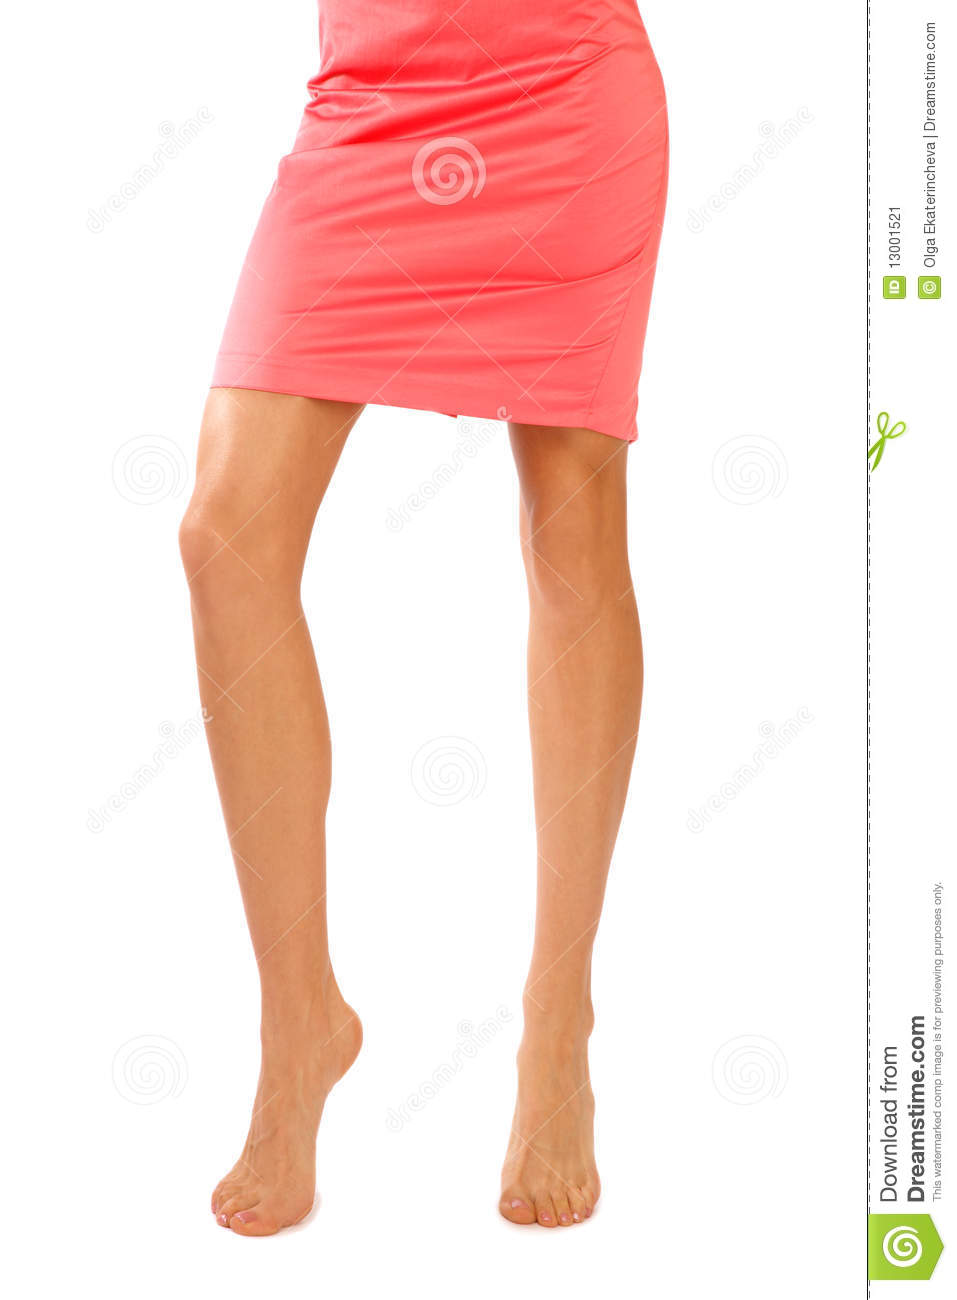 Slim Legs Of Tanned Sexy Barefoot Woman In Coral Dress On White